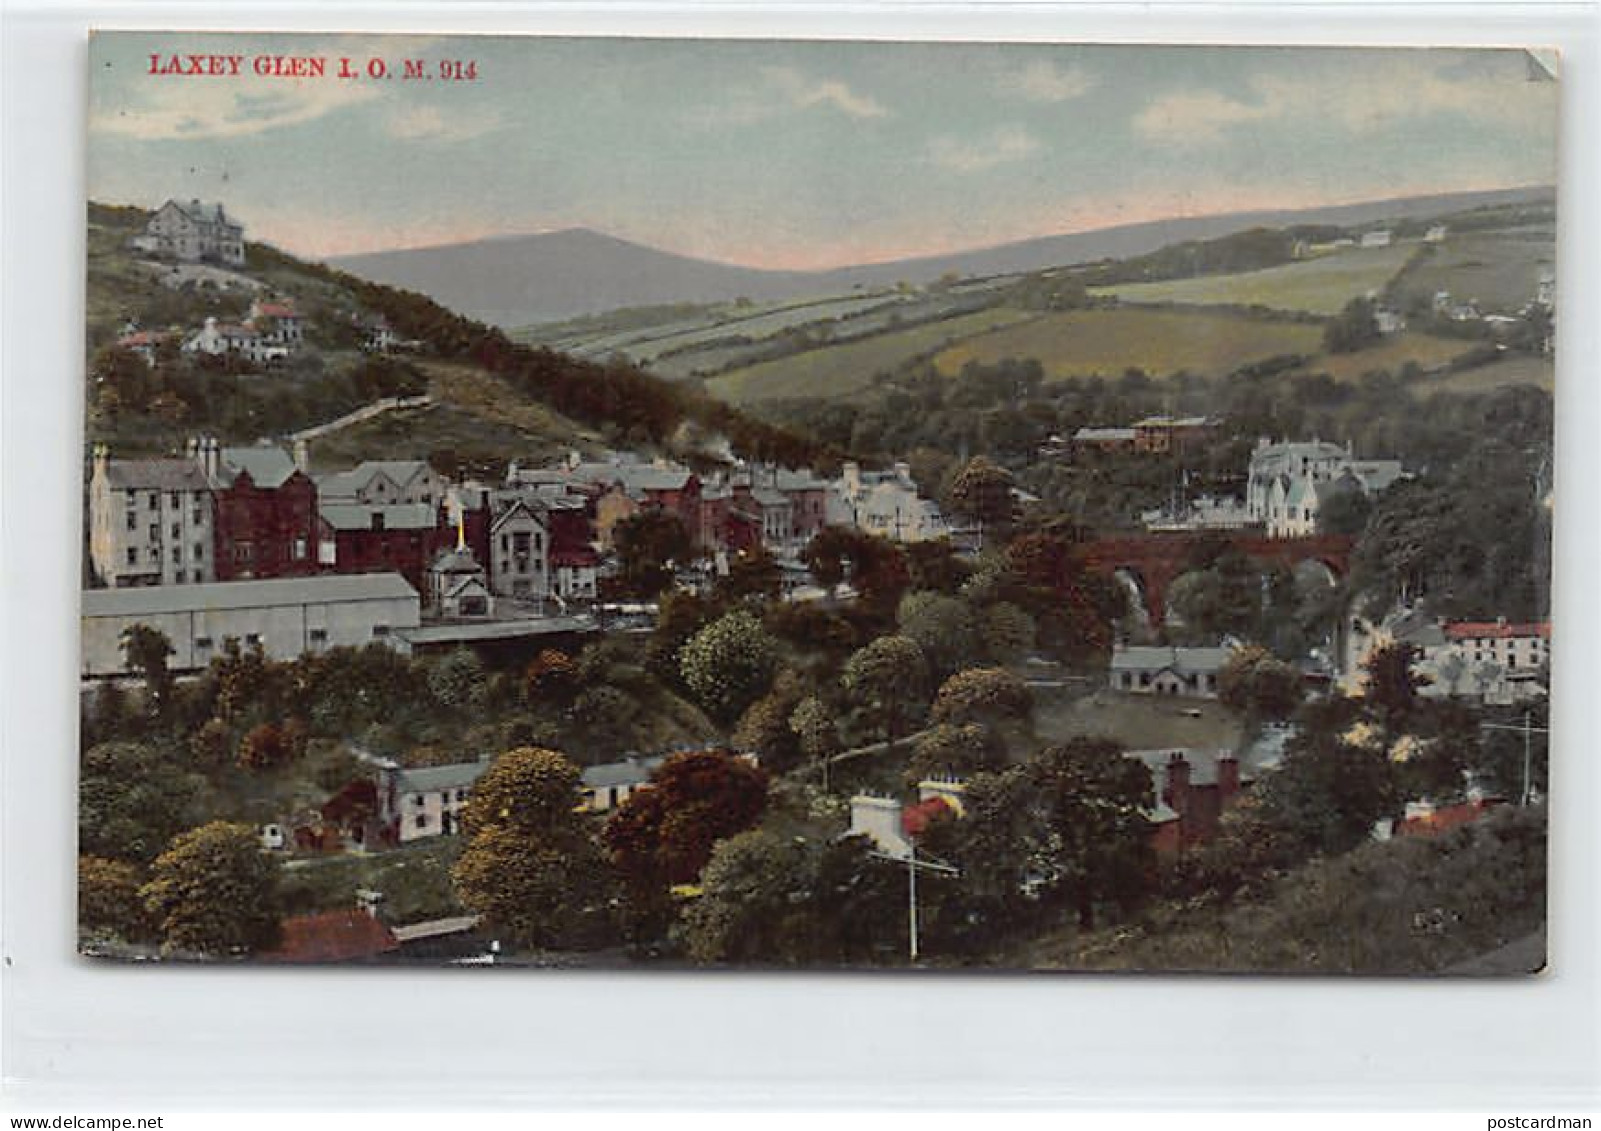 Isle Of Man - Laxey Glen - Publ. W. A. & S. 914 - Insel Man